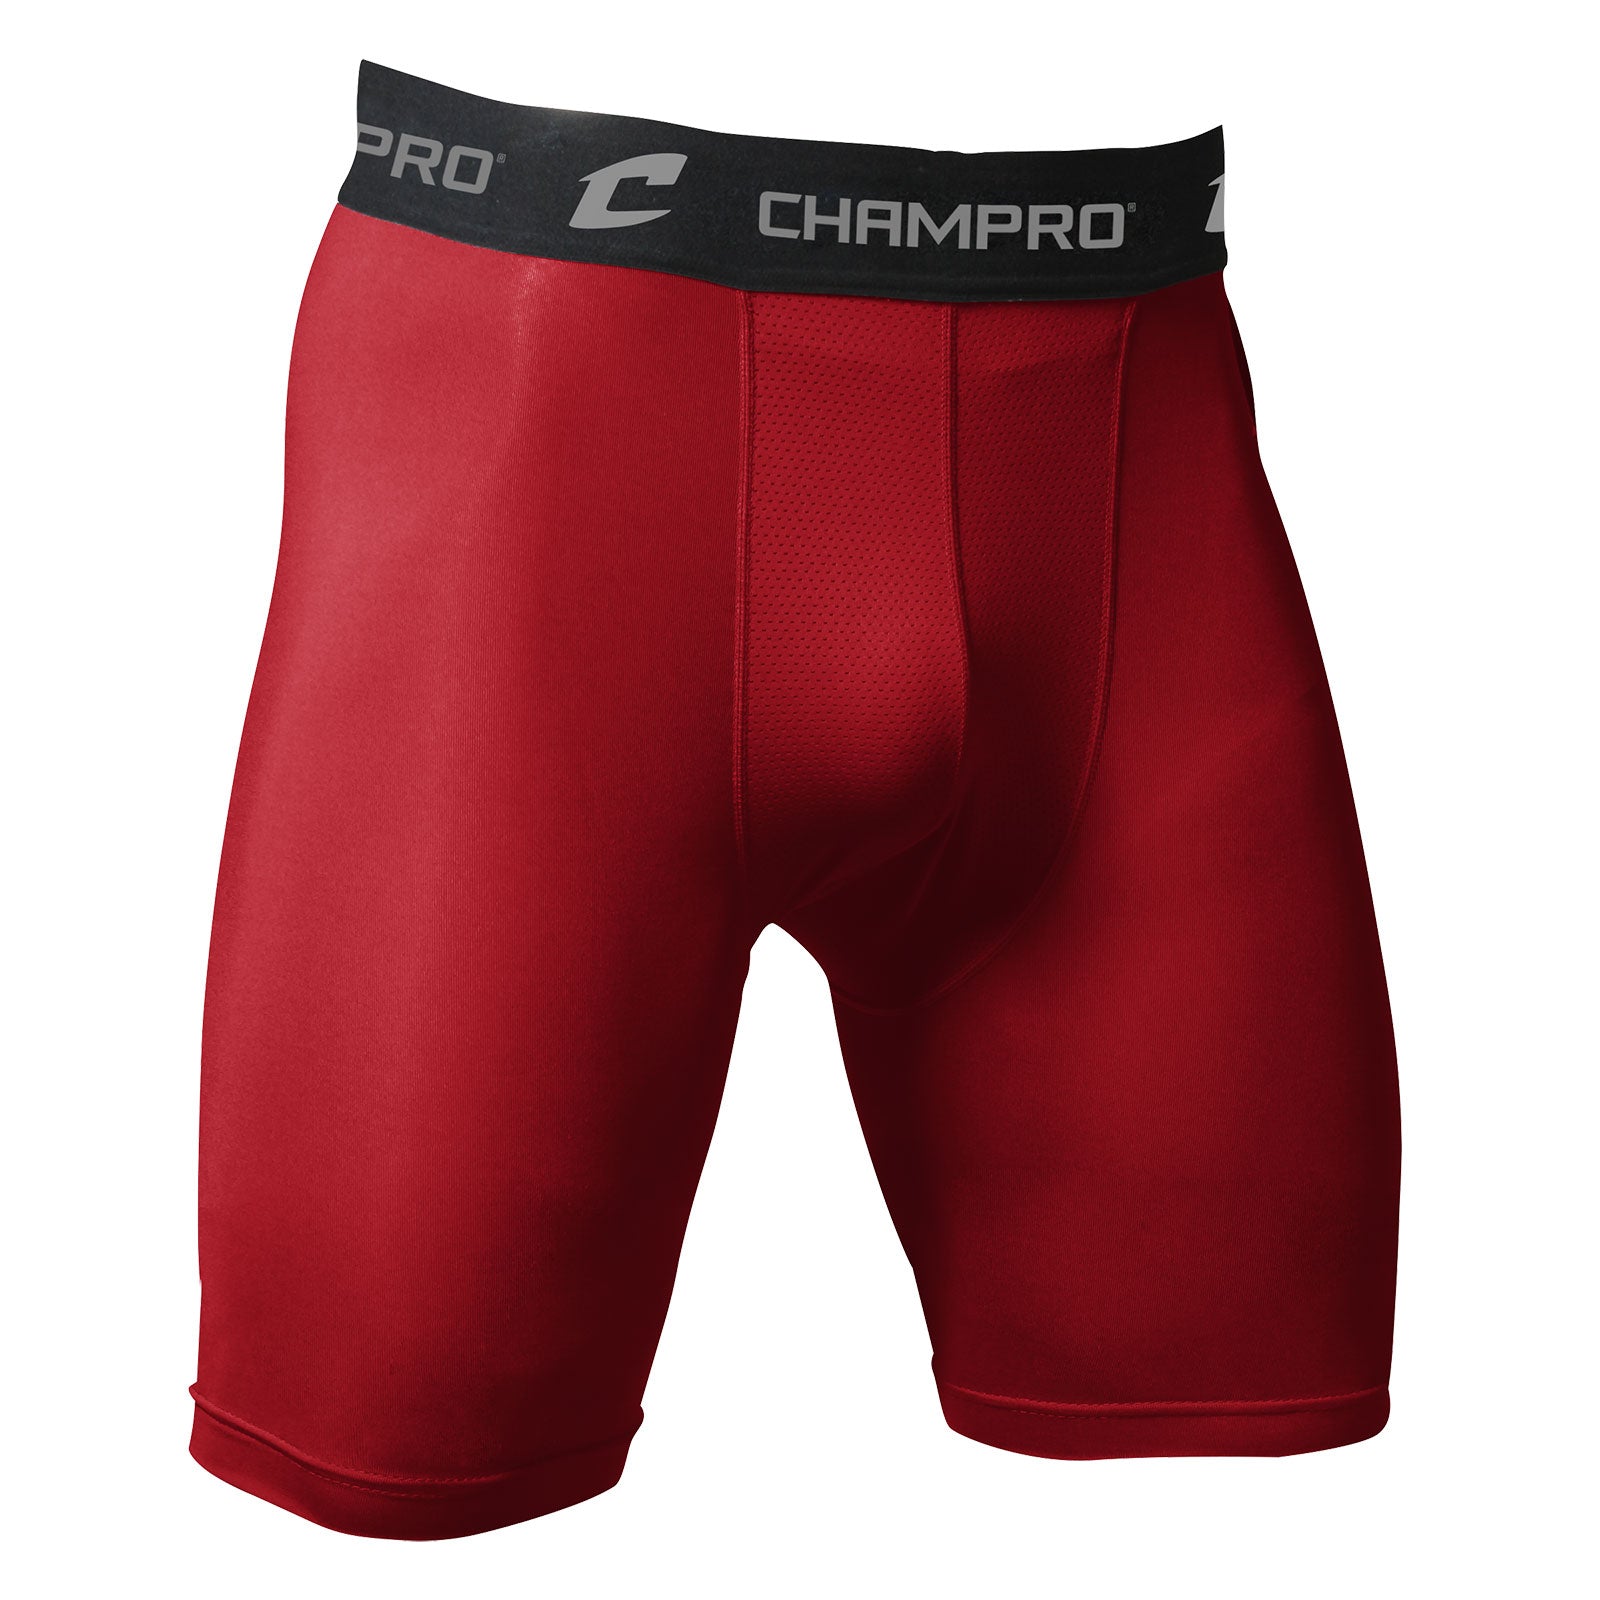 CHAMPRO YOUTH COMPRESSION SHORTS-SCARLET